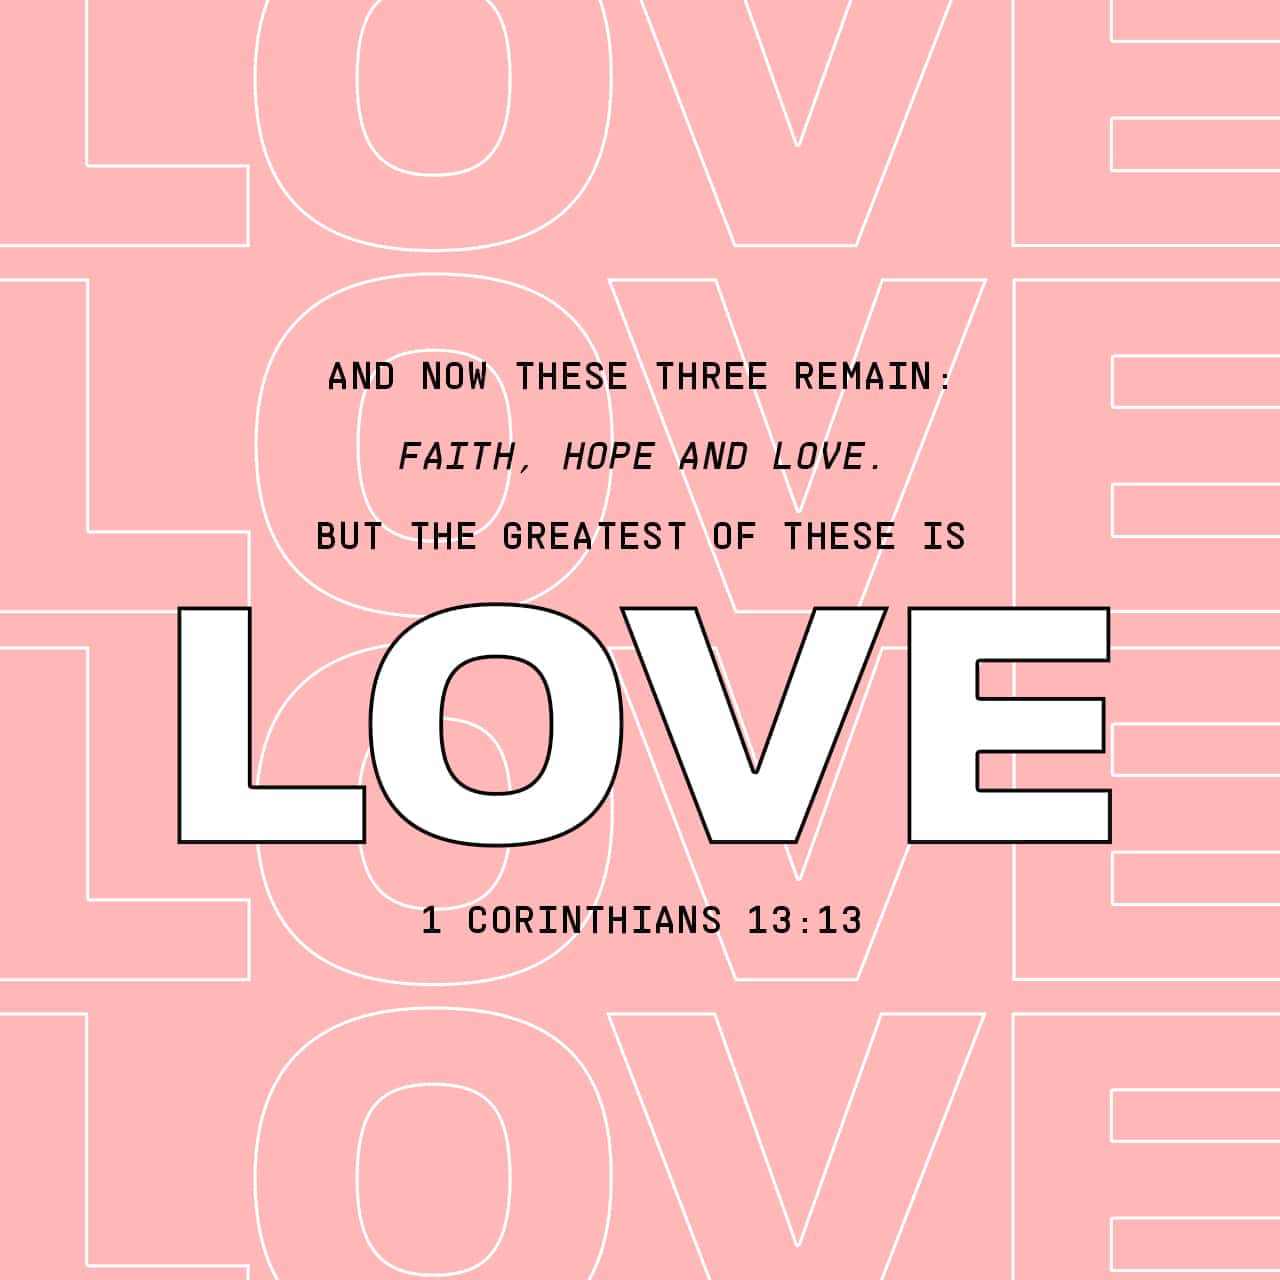 1 Corinthians 13 13 And Now These Three Remain Faith Hope And Love But The Greatest Of These Is Love Until Then There Are Three Things That Remain Faith Hope And Love Yet Love